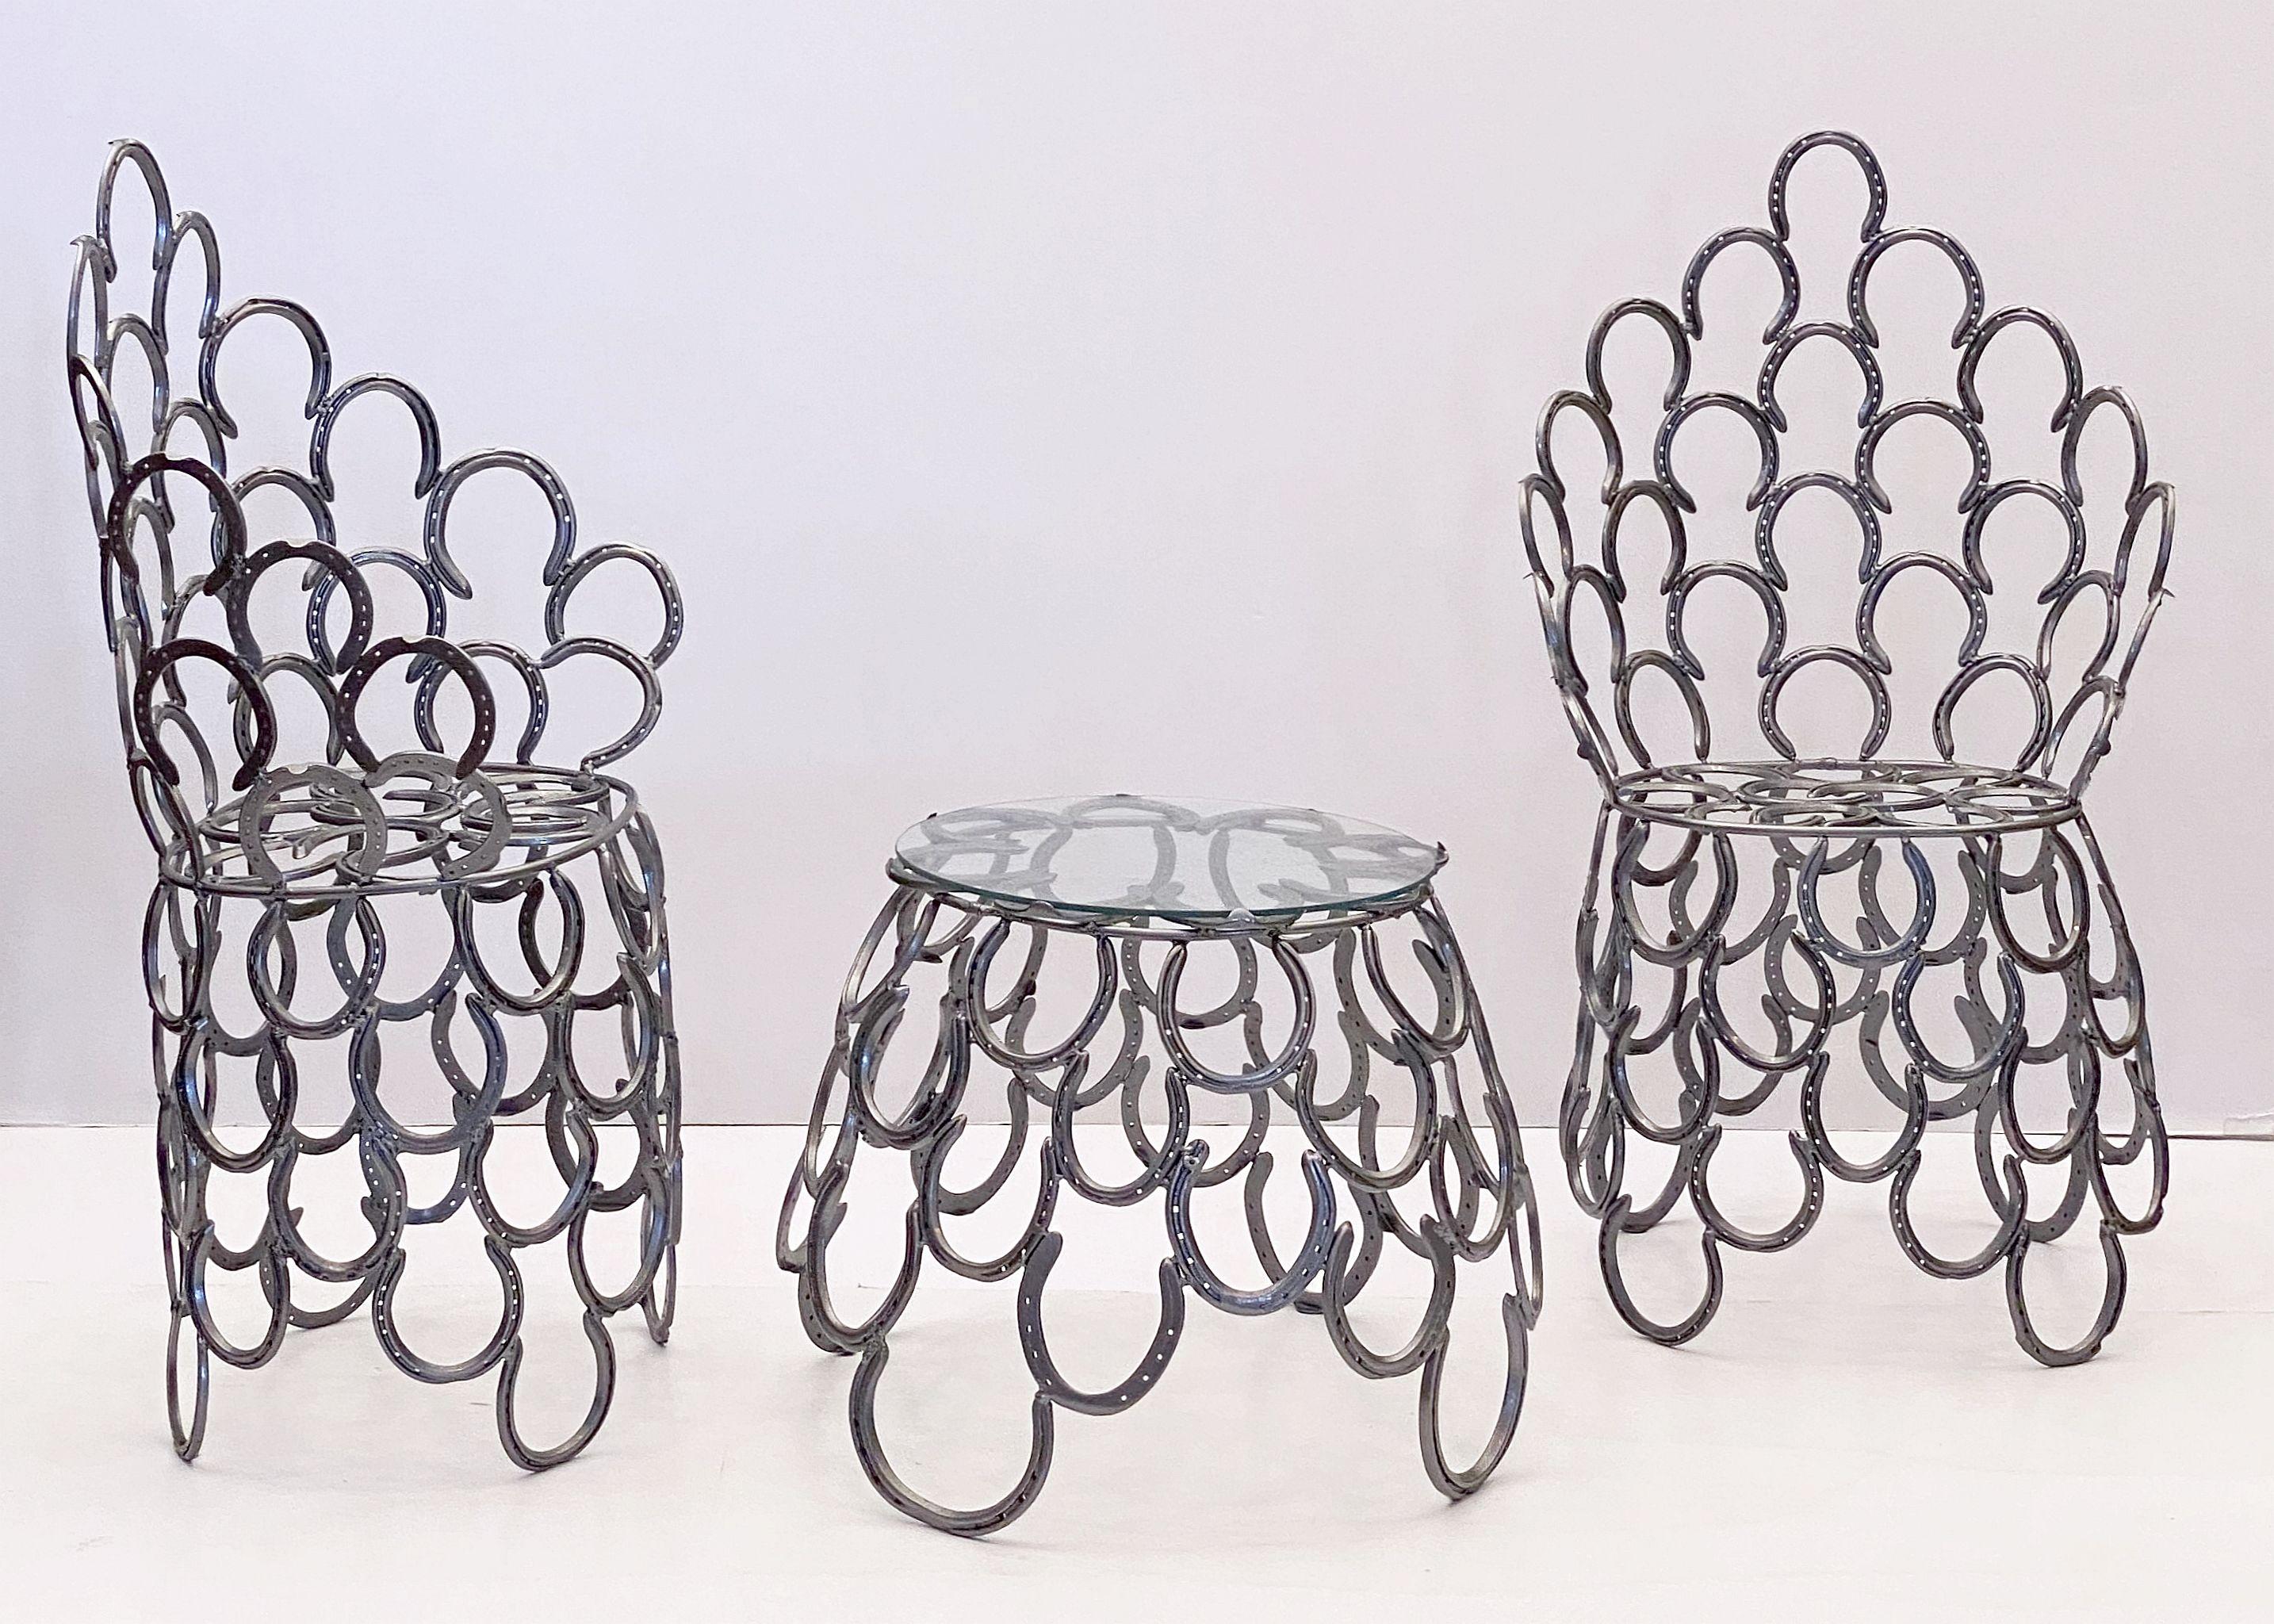 A lovely English garden set (includes table and two chairs) - each piece featuring a decorative design of iron horseshoes that together create a very comfortable seating. The table includes an optional fitted round glass top

Table dimensions: